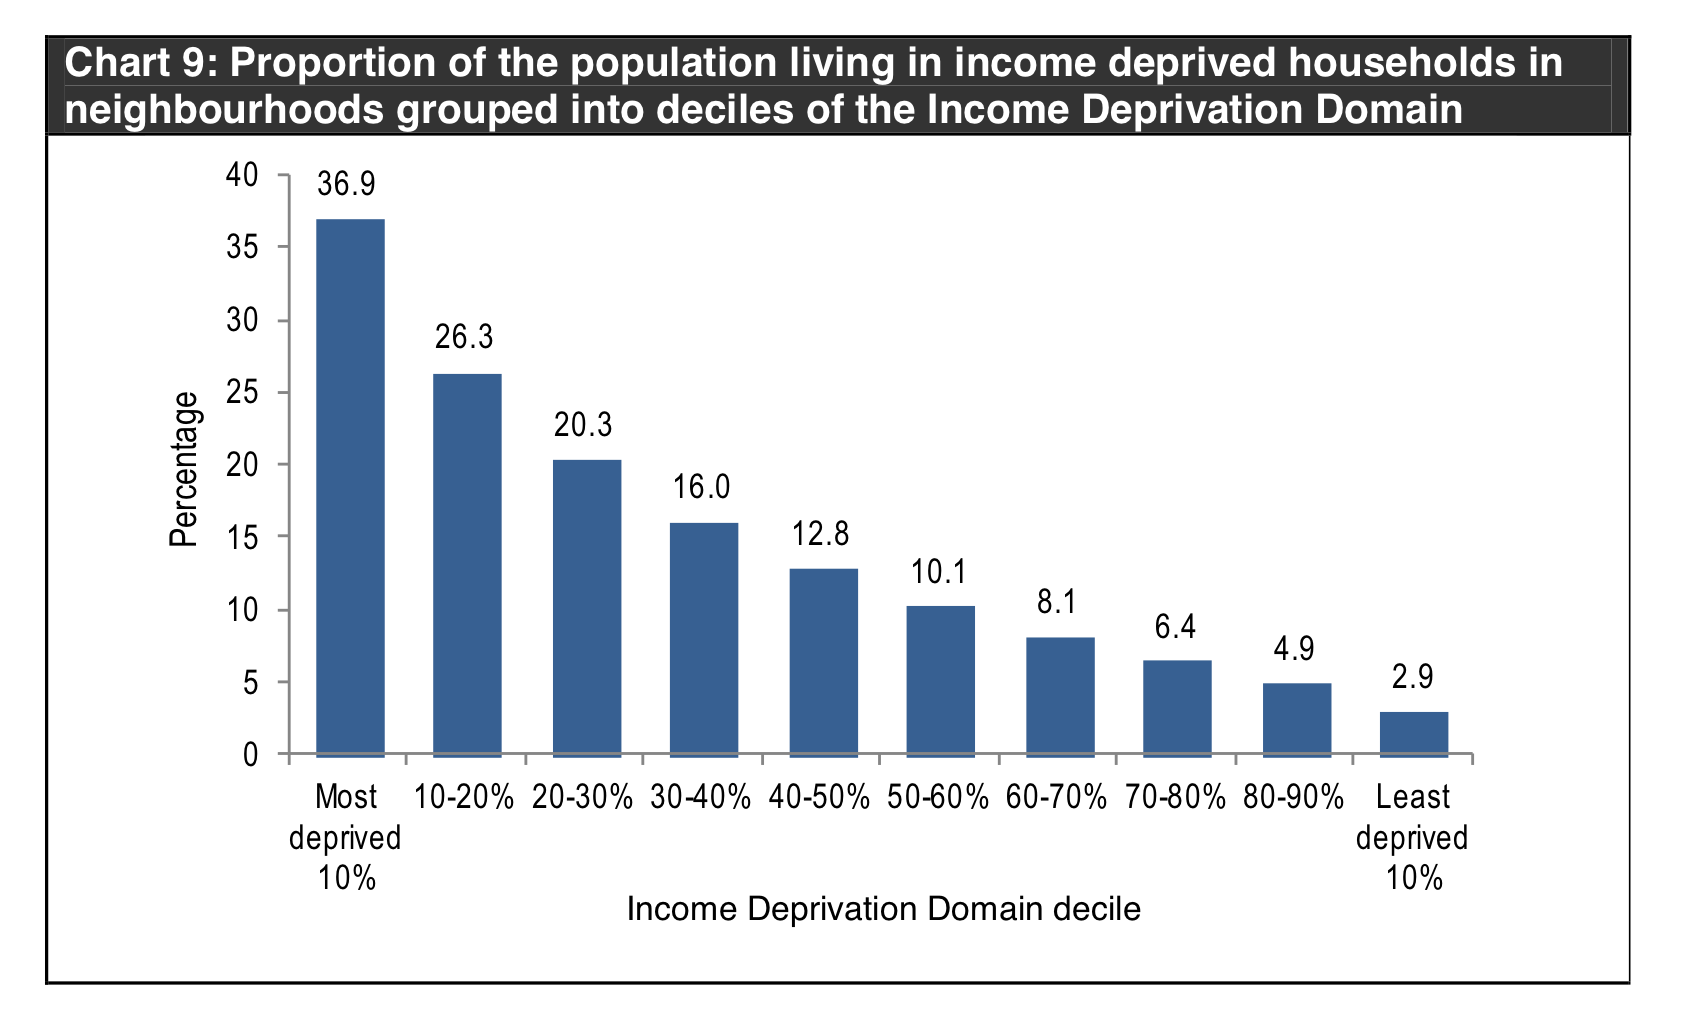 The chart's axis shows the grouped Income Deprivation Domain deciles. 36.9% of the population are in the most deprived 10% decile, 26.3% are in the 10-20% decile, 20.3% are in the 20-30% decile, 16% are in the 30-40% decile, 12.8% are in the 40-50% decile, 10.1% are in the 50-60% decile, 8.1% are in the 60-70% decile, 6.4% are in the 70-80% decile, 4.9% are in the 80-90% decile, and 2.9% are in the least deprived 10% decile.